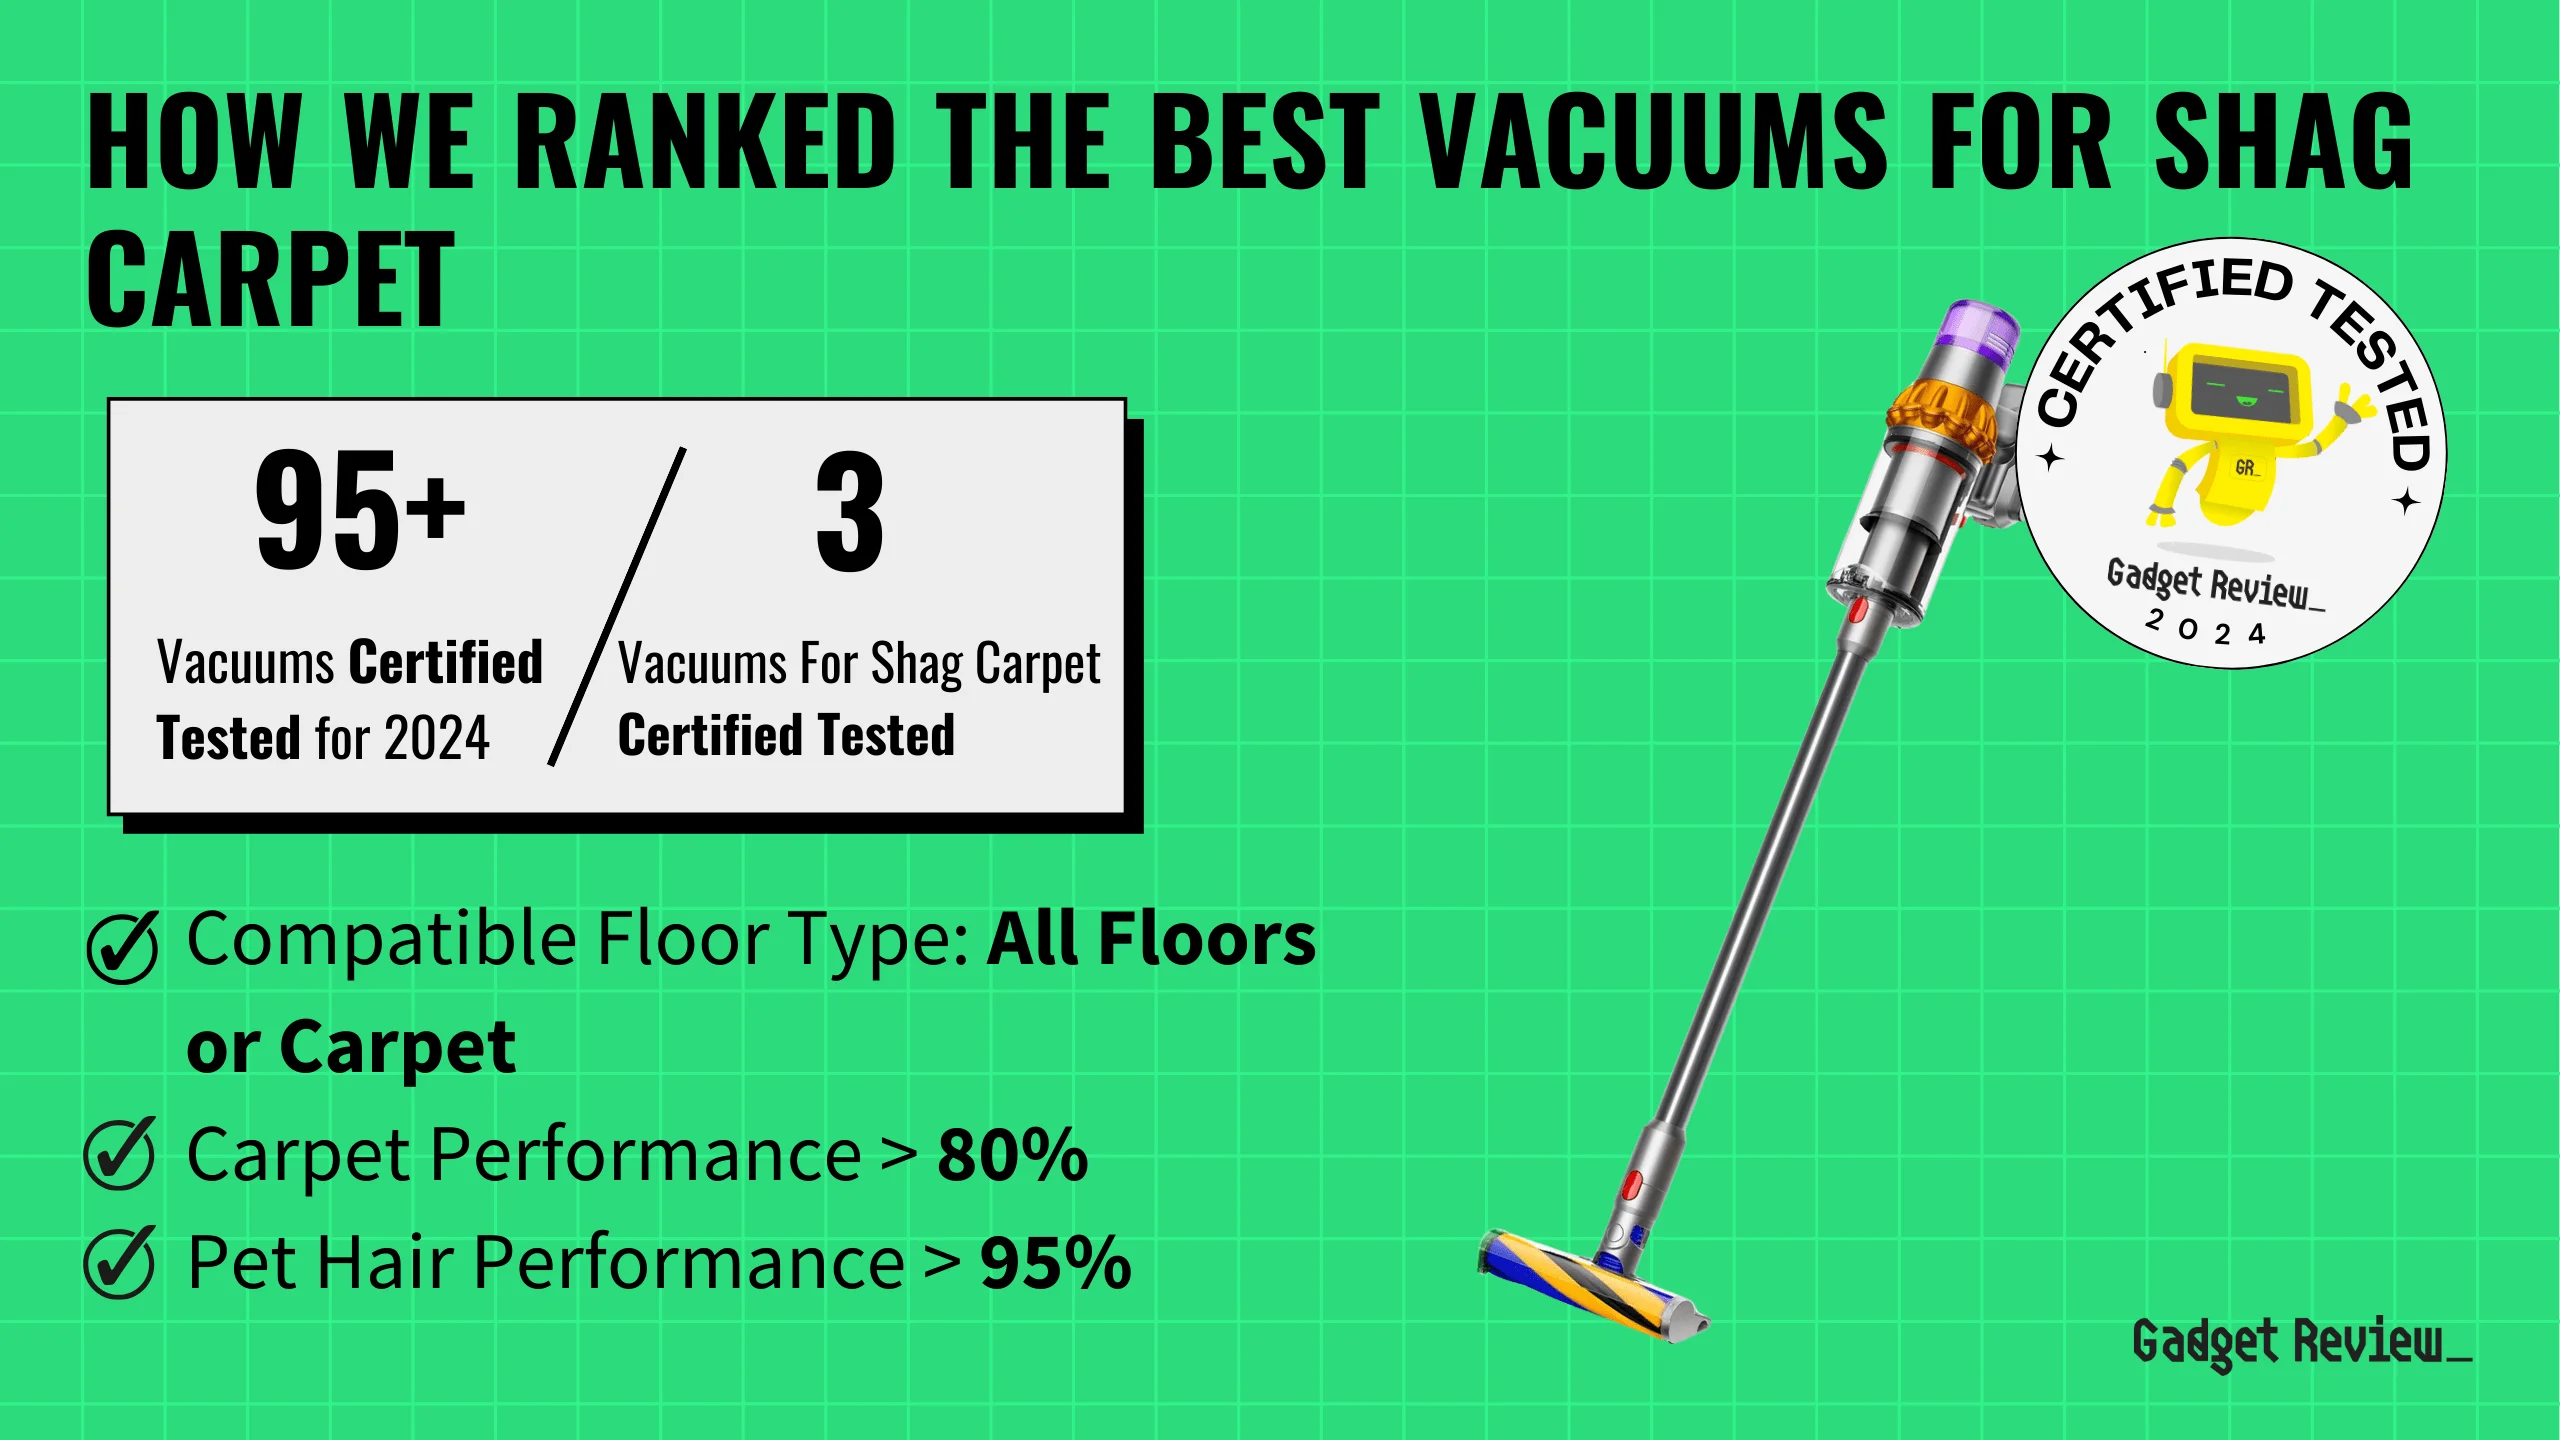 How We Ranked the 3 Best Vacuums for Shag Carpet